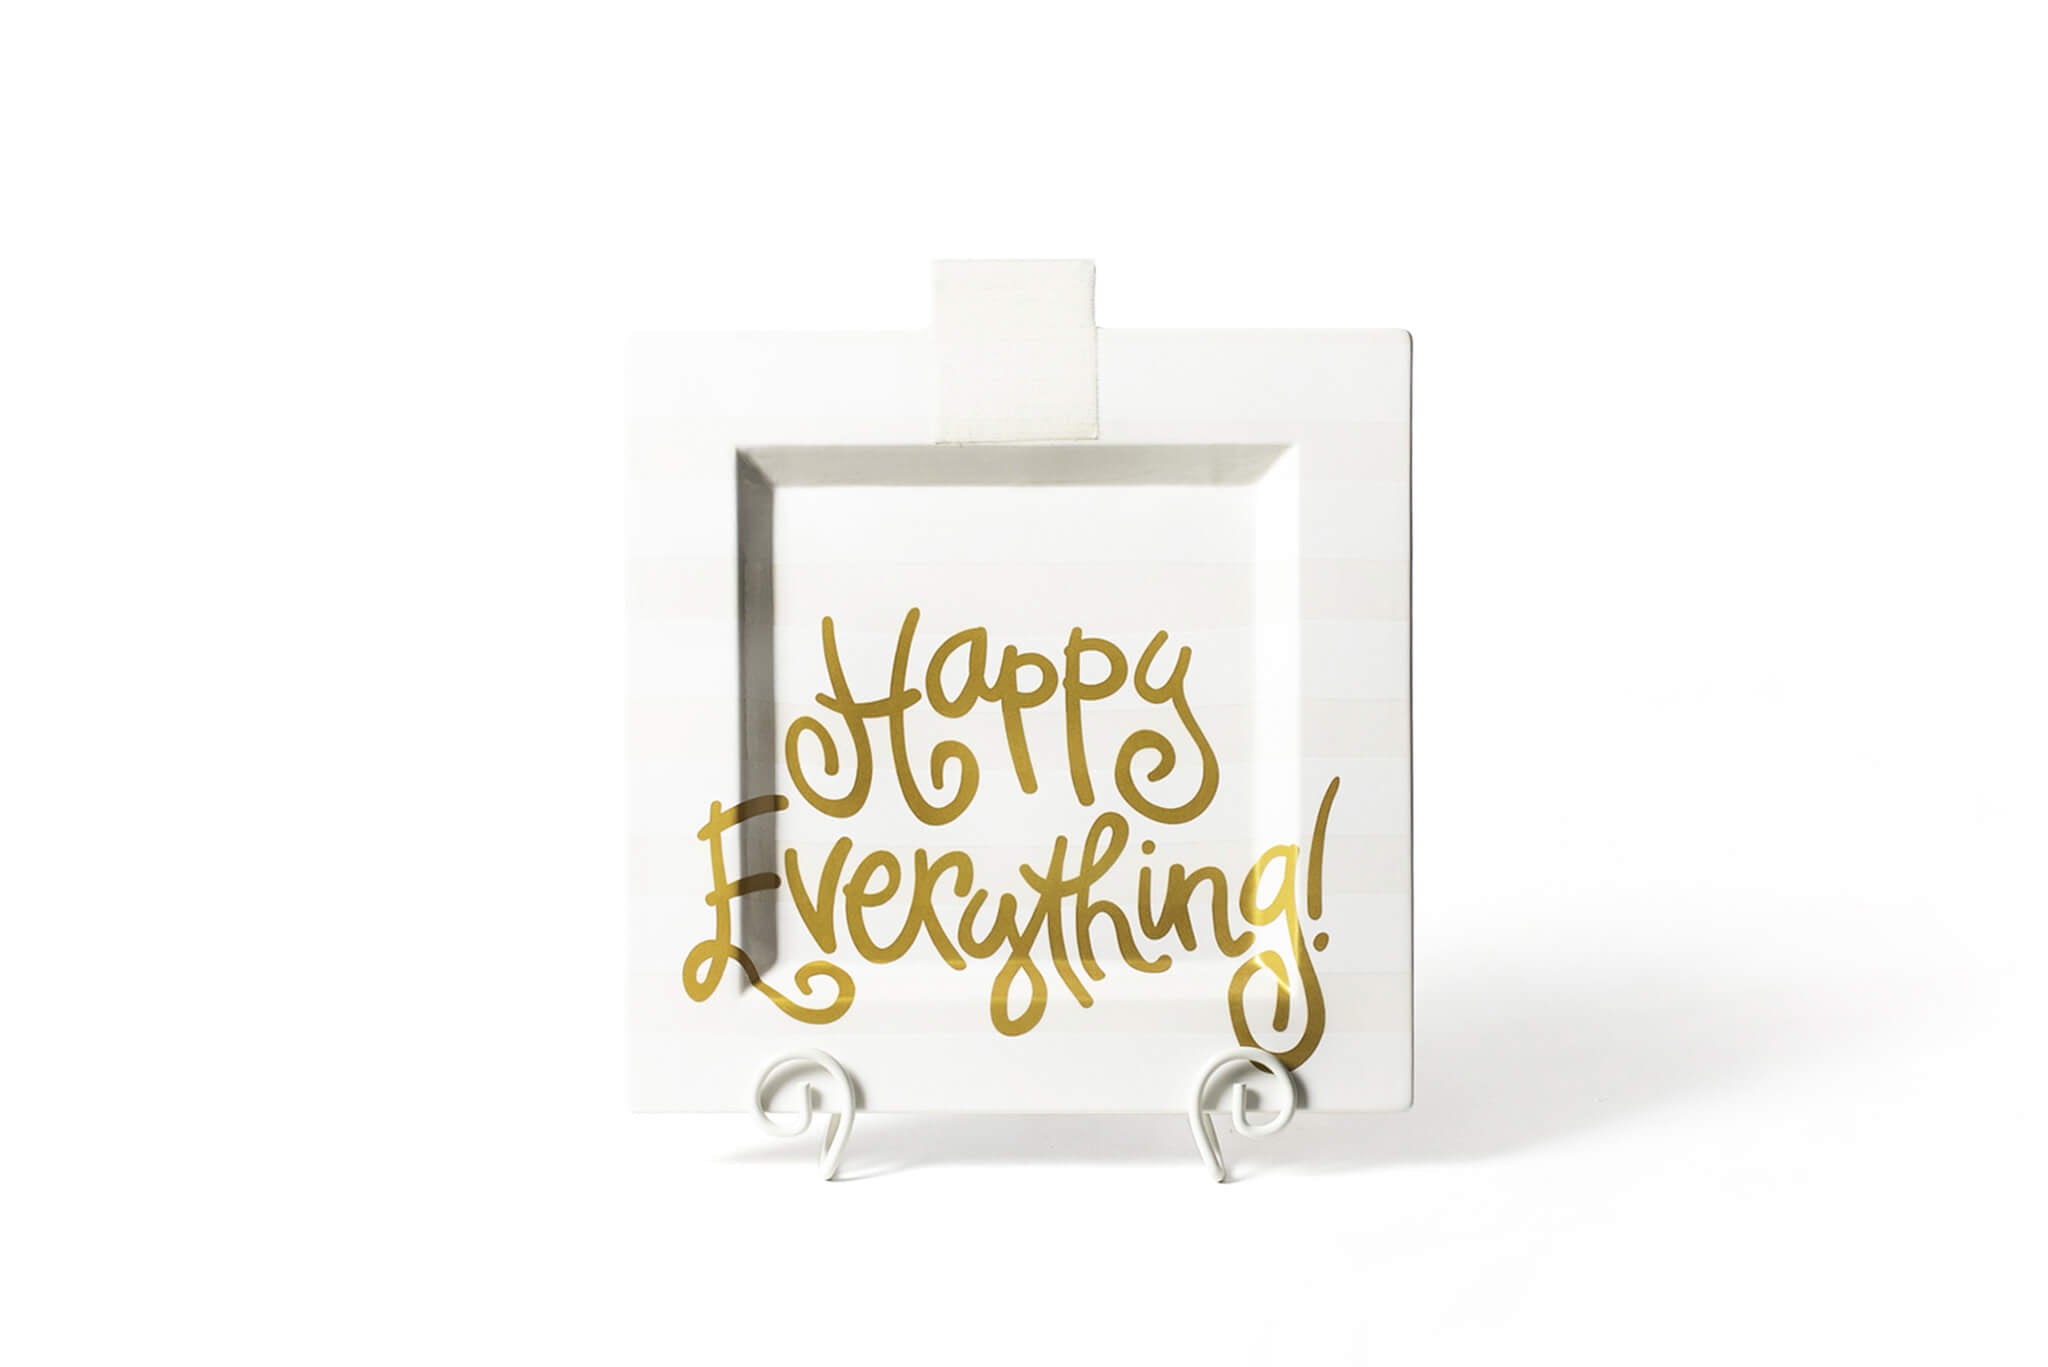 Happy Everything White Large Swirl Plate Stand by Happy Everything!